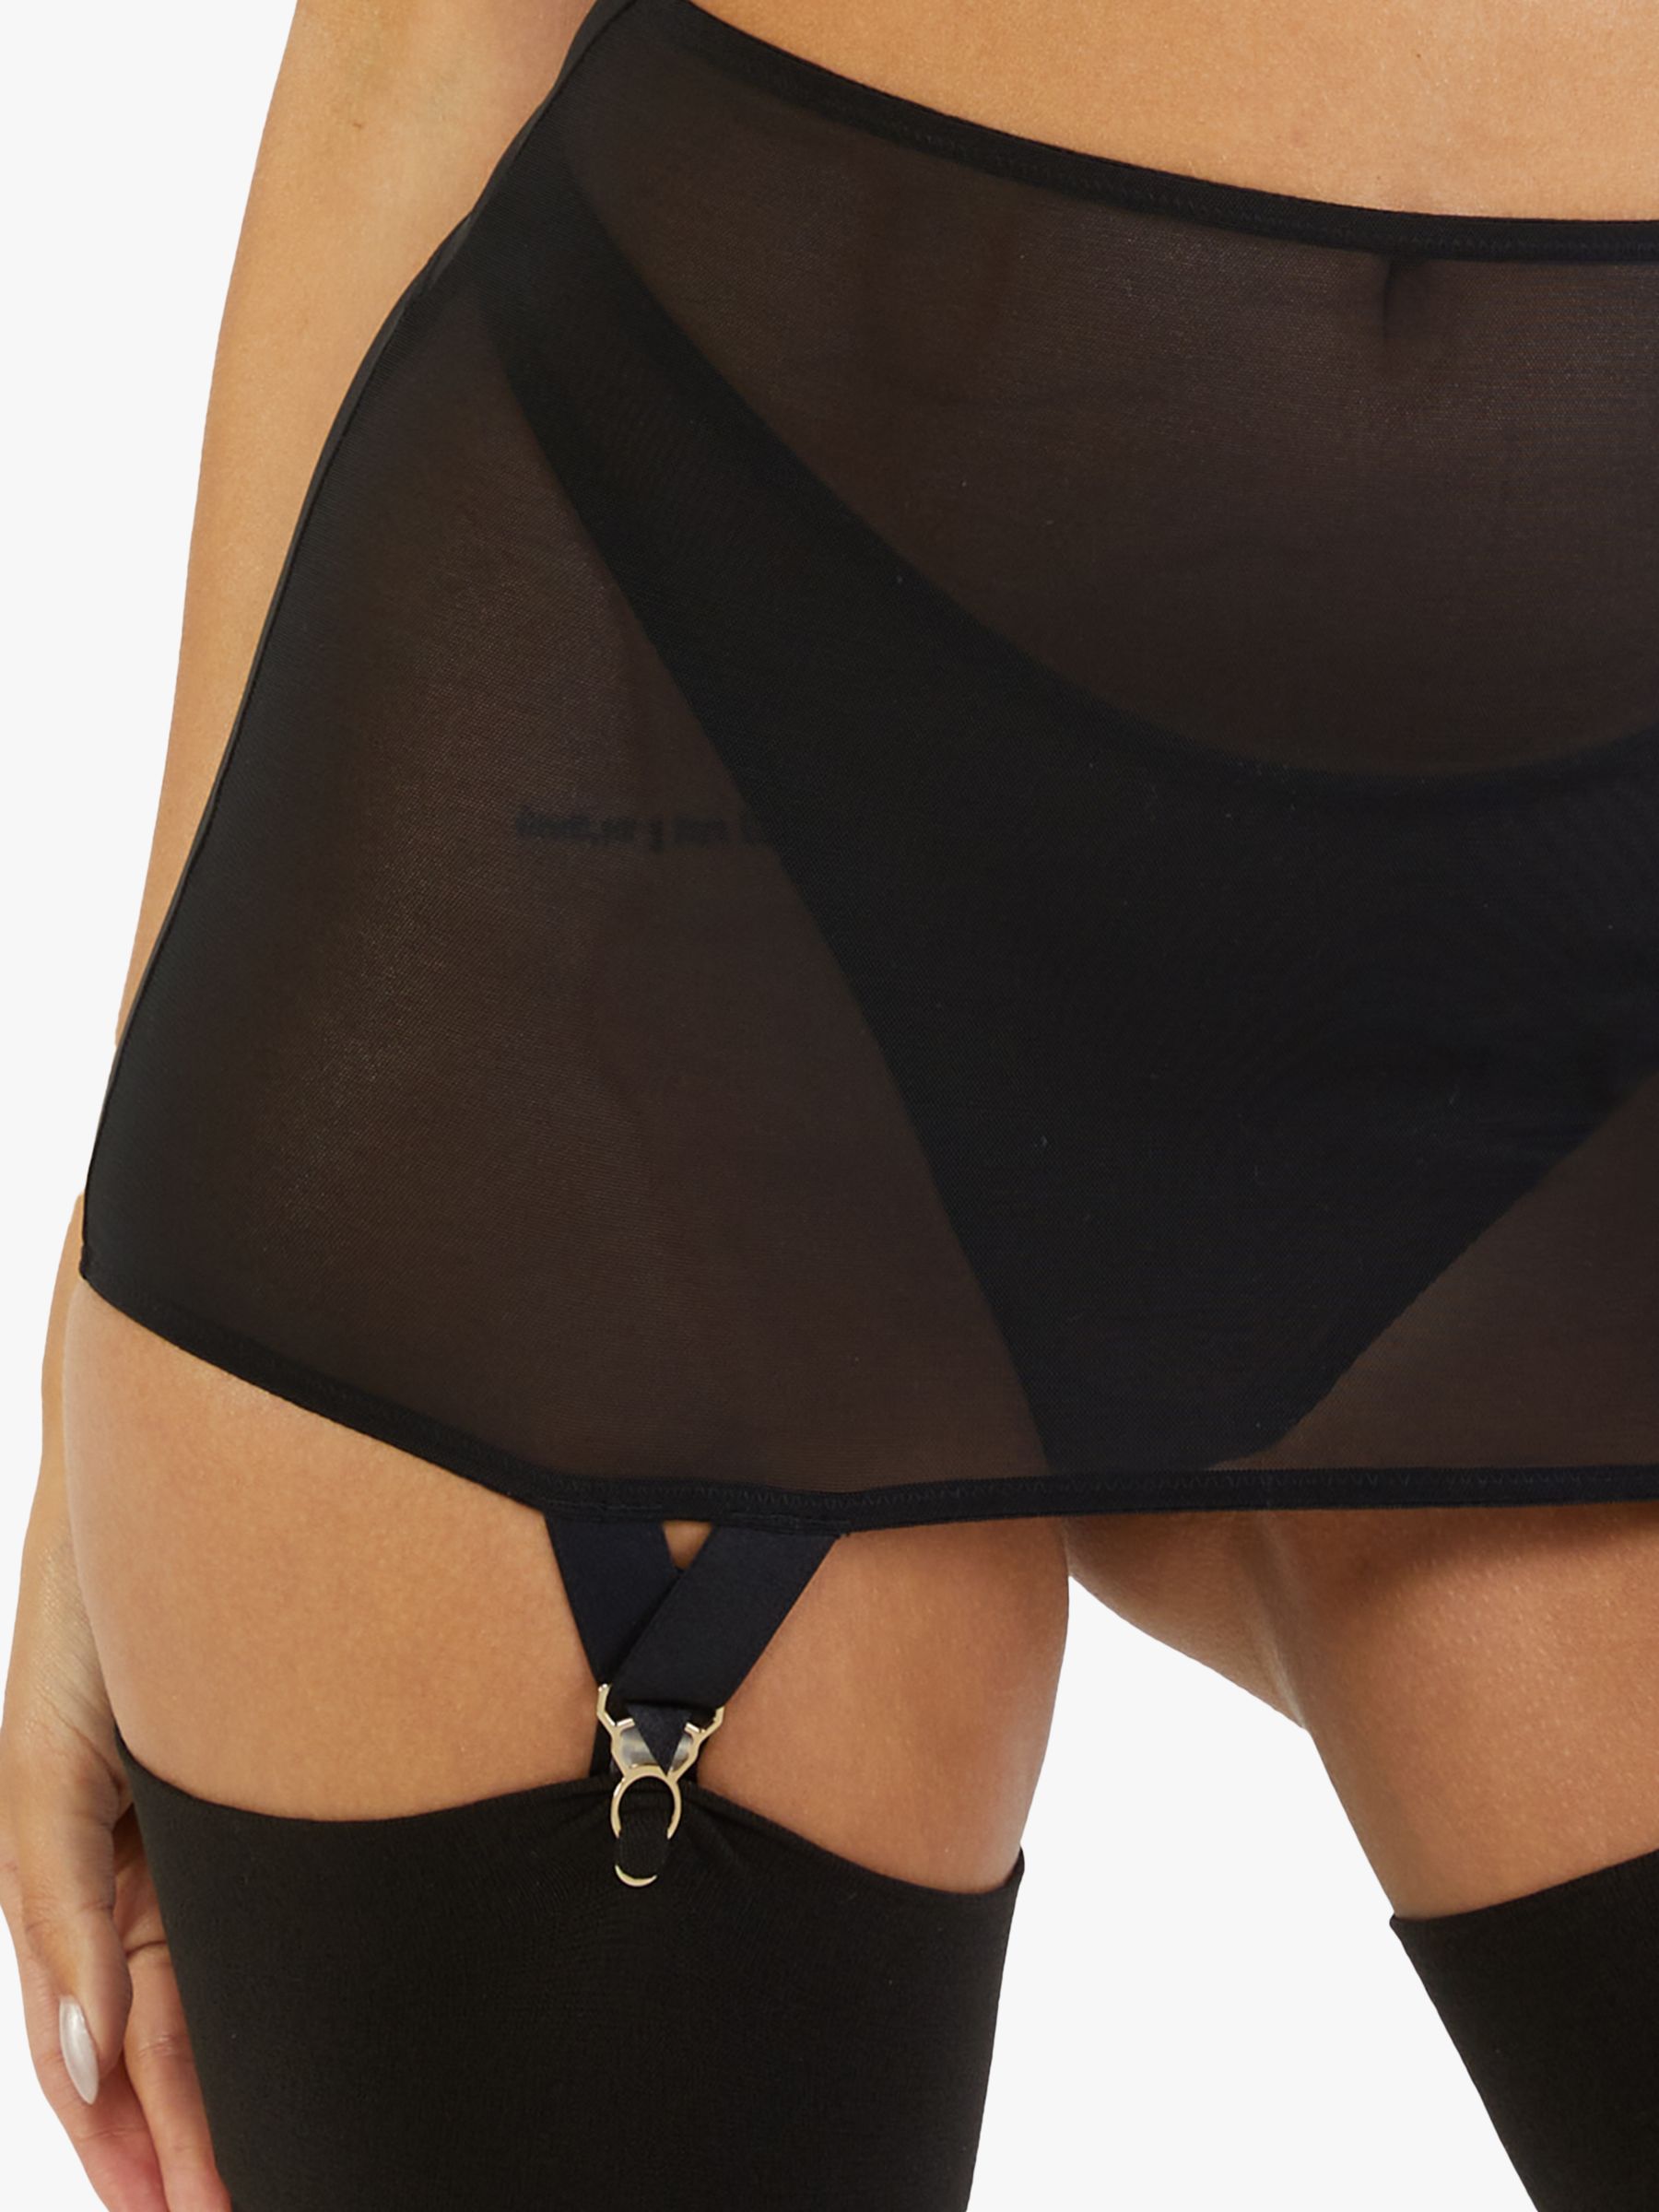 AND/OR Wren Lace Suspender, Black at John Lewis & Partners